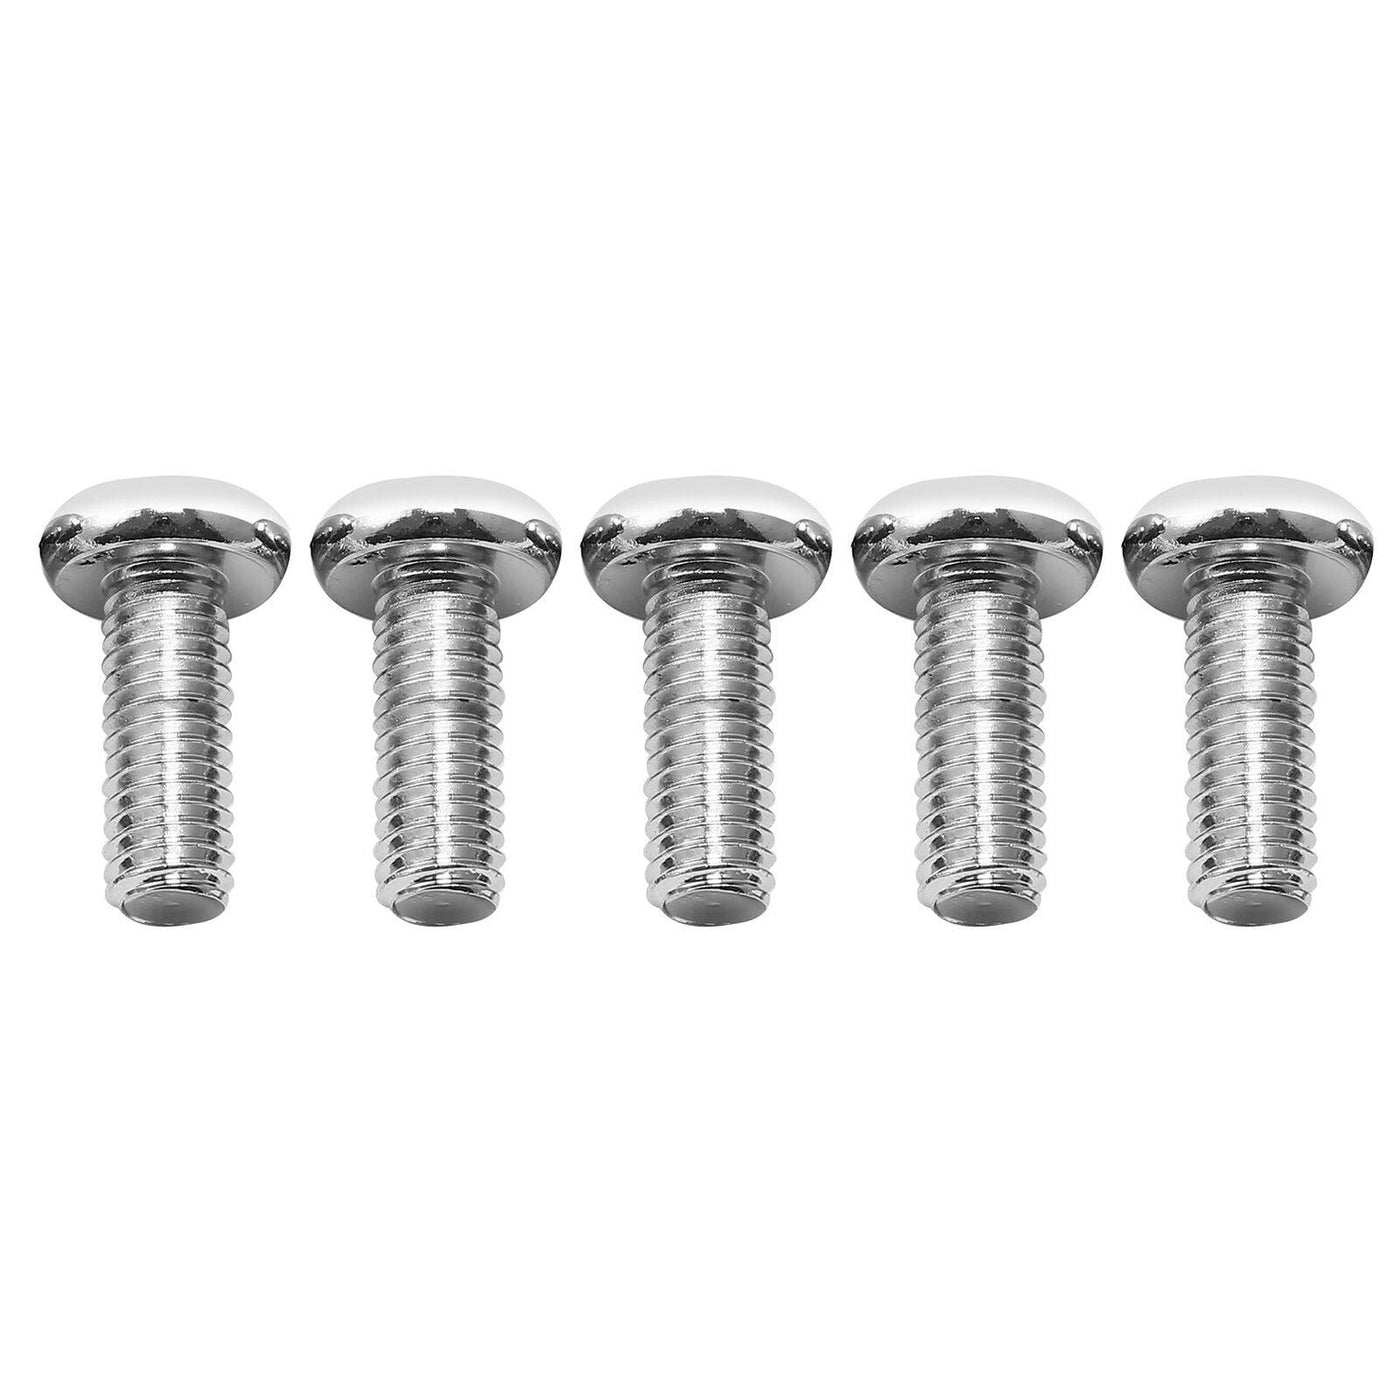 5x Rear Disk Brake Rotor Bolts Fit For Harley Davidson Softail Dyna Sportster XL - Moto Life Products